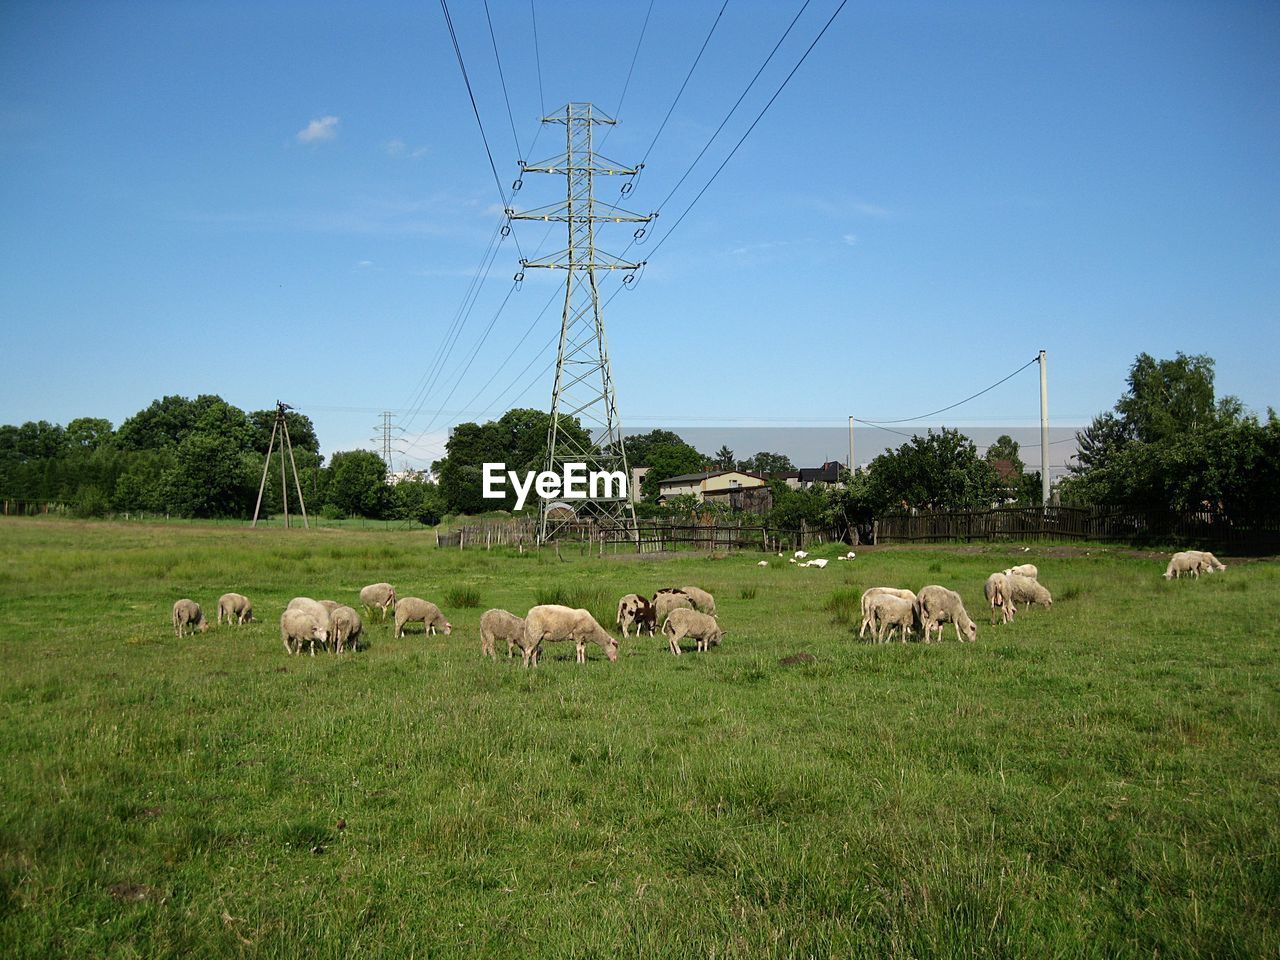 pasture, electricity, mammal, grass, cable, plant, domestic animals, livestock, animal themes, field, sky, agriculture, animal, nature, electricity pylon, group of animals, rural area, power line, landscape, land, grassland, pet, environment, power supply, meadow, rural scene, large group of animals, no people, technology, grazing, power generation, cattle, green, tree, farm, blue, plain, prairie, day, clear sky, natural environment, outdoors, animal wildlife, sheep, herding, flock of sheep, beauty in nature, herd